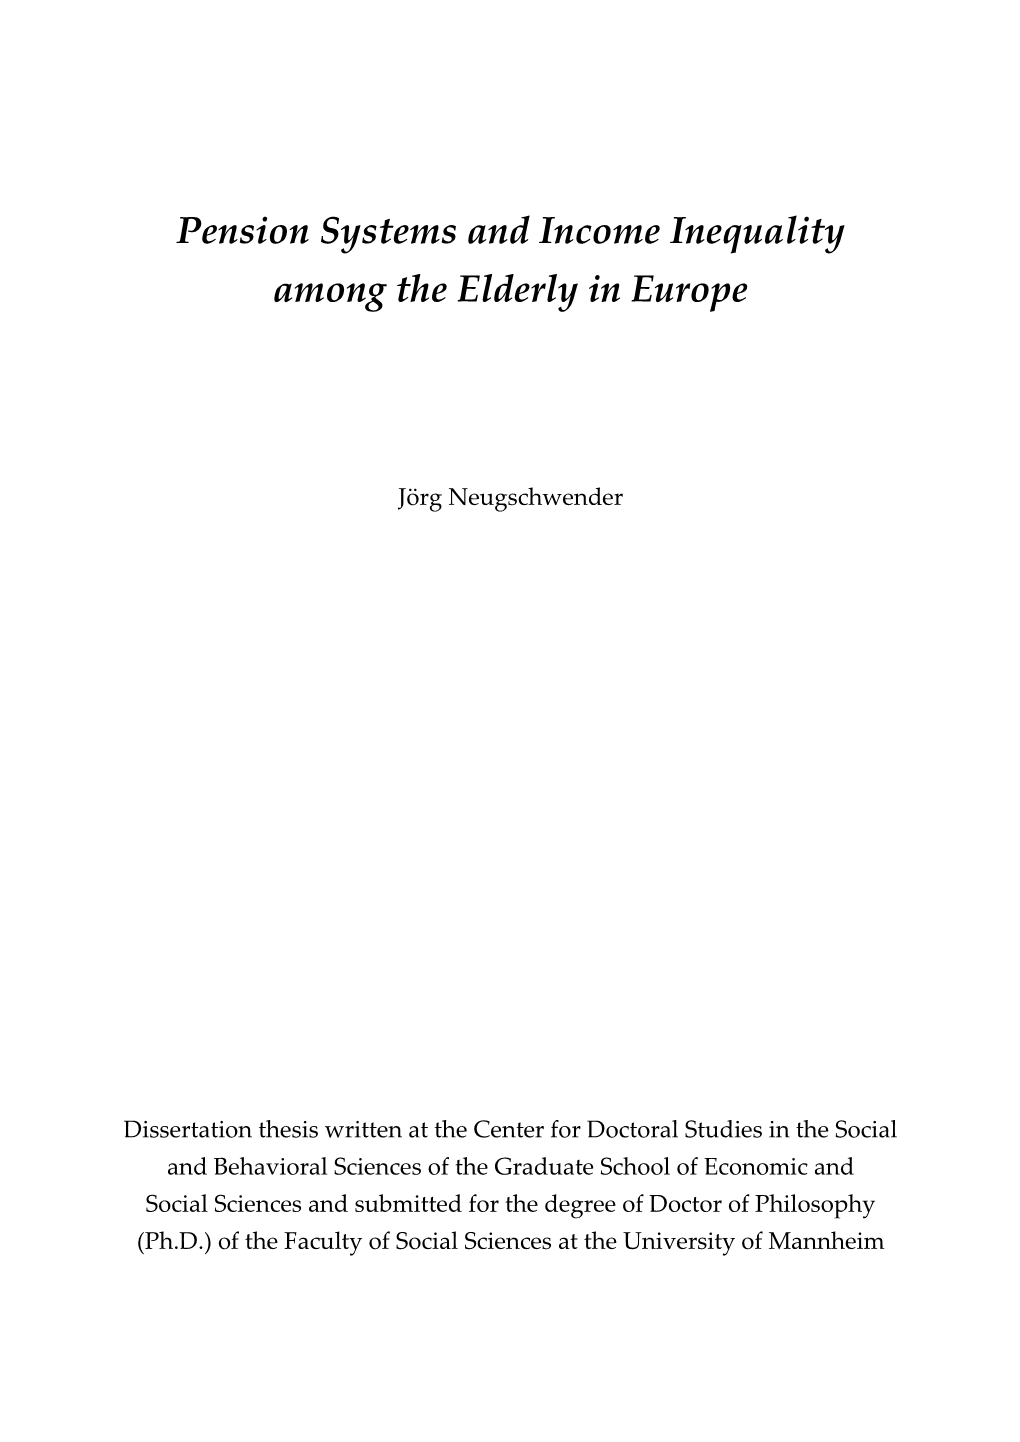 Pension Systems and Income Inequality Among the Elderly in Europe